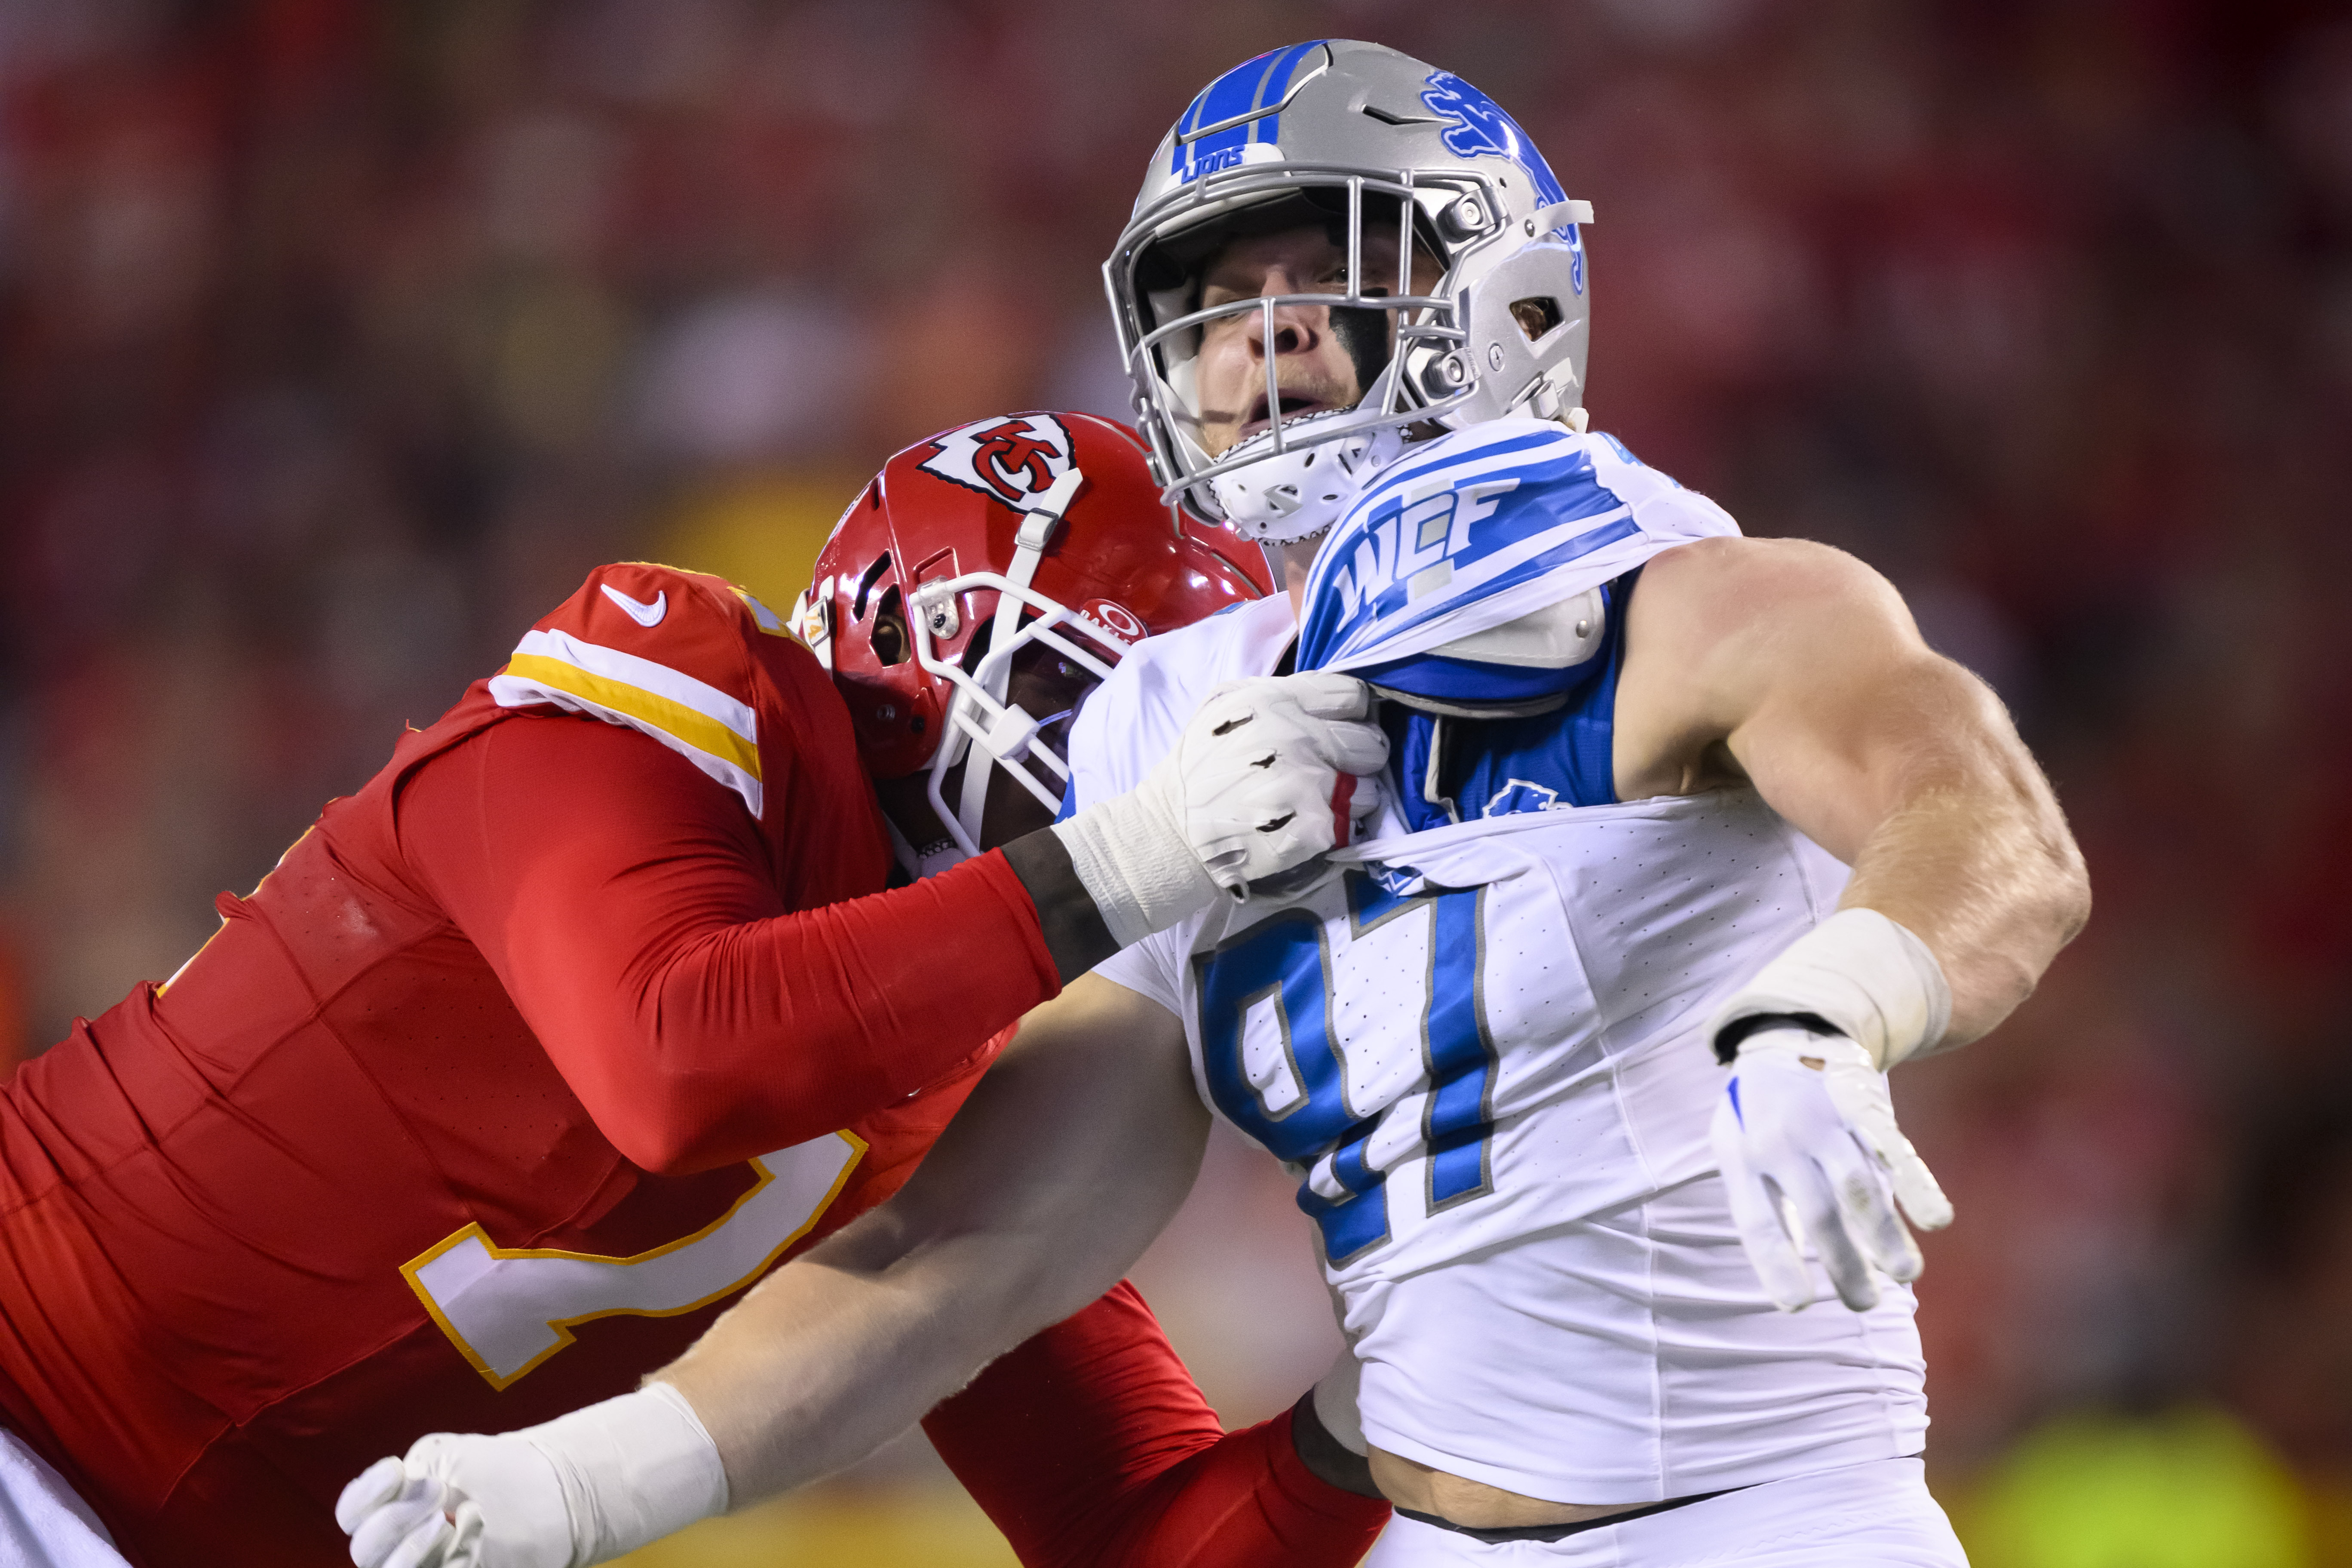 Lions spoil Chiefs' celebration of Super Bowl title by rallying for 21-20  win in NFL's opener